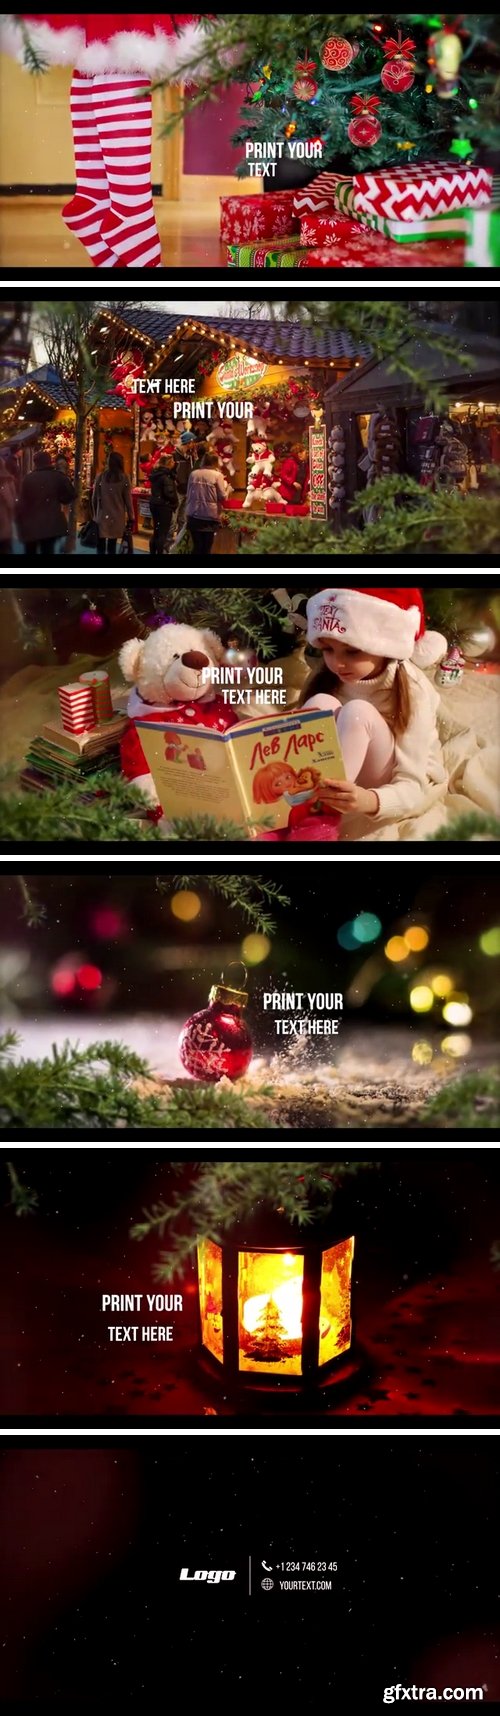 MA - Xmas New Year Slideshow After Effects Templates 151298